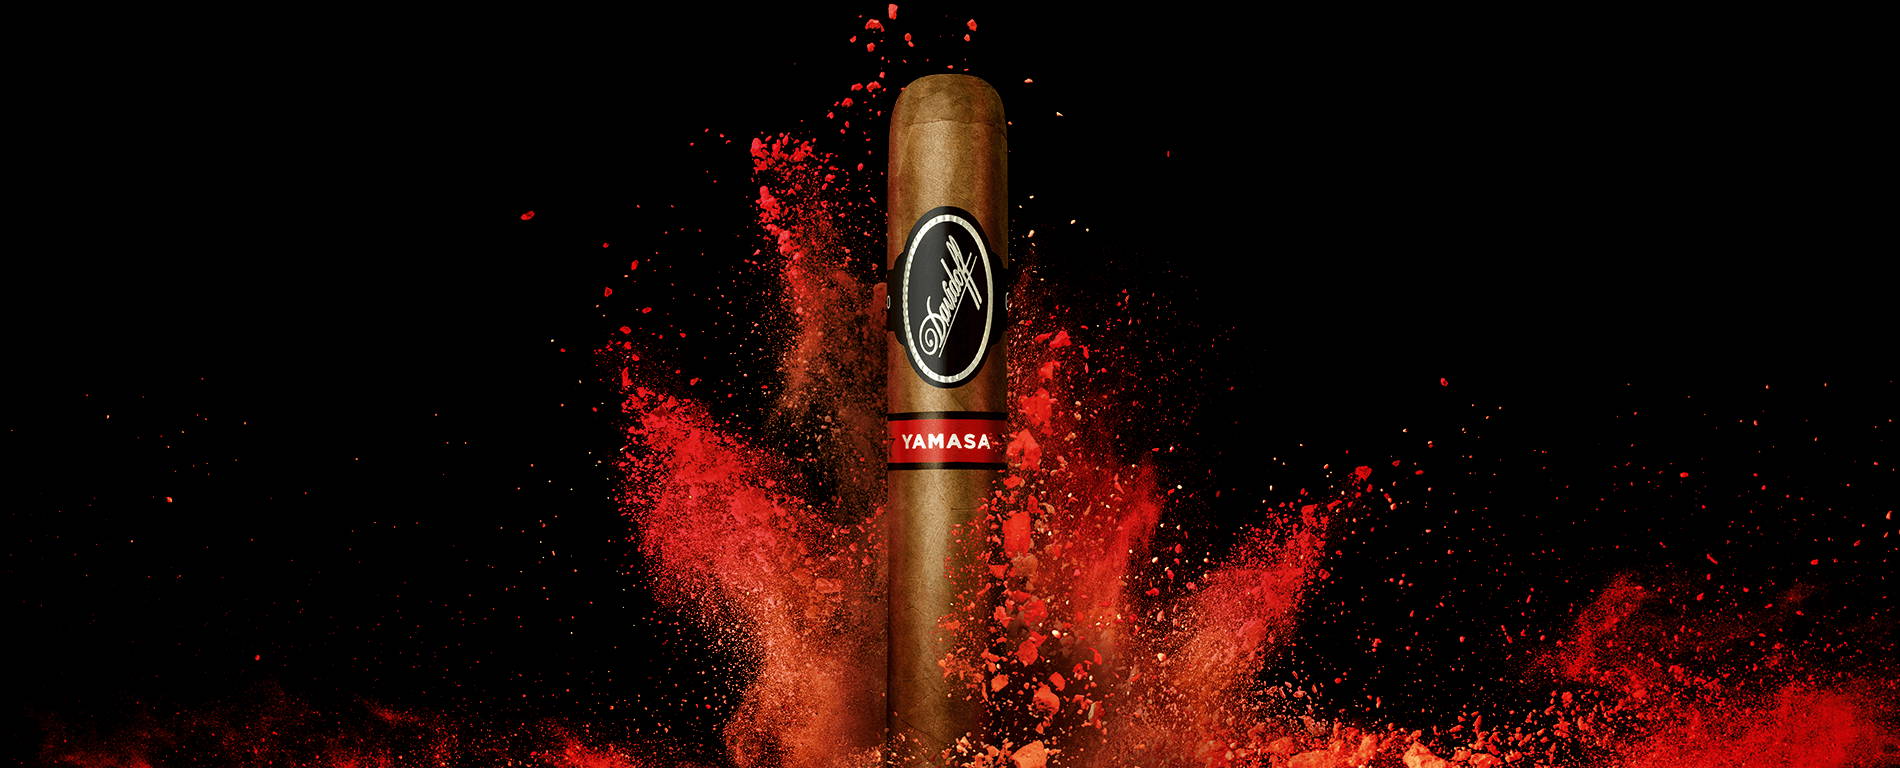 A Davidoff Yamasá cigar standing upright in front of a splash of bright red colour.